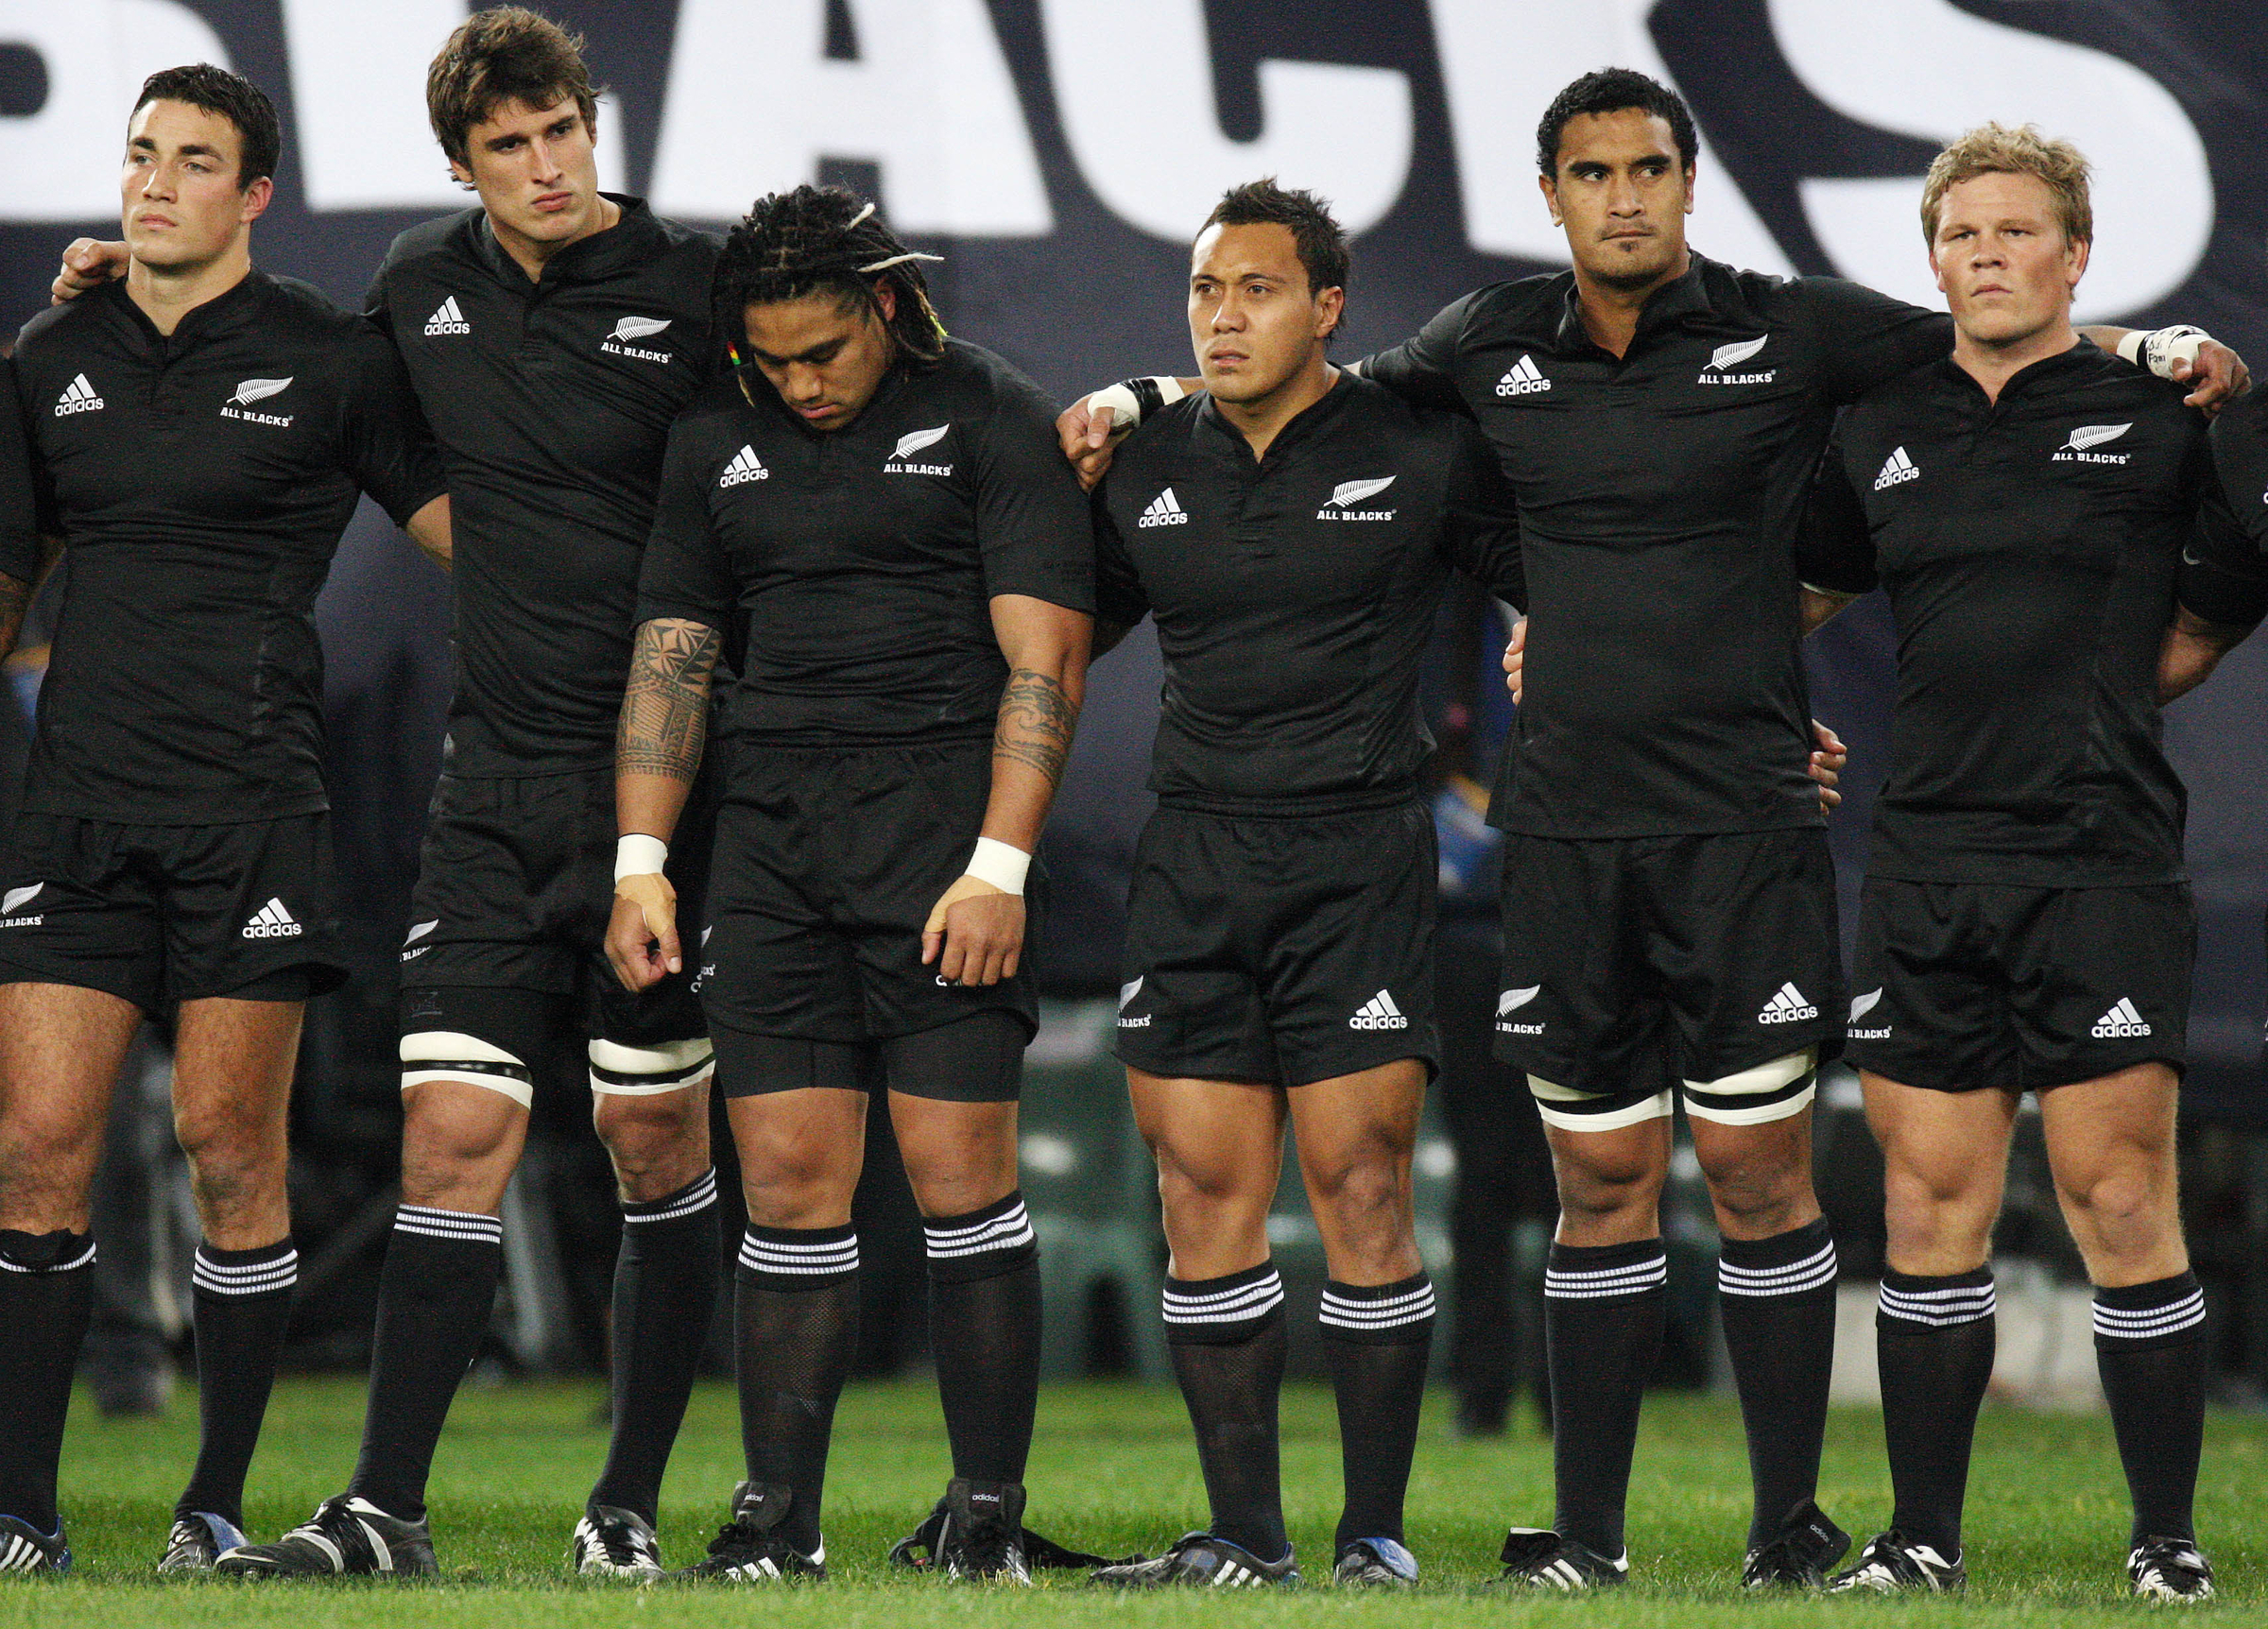 New Zealand will be looking to make it 3-0